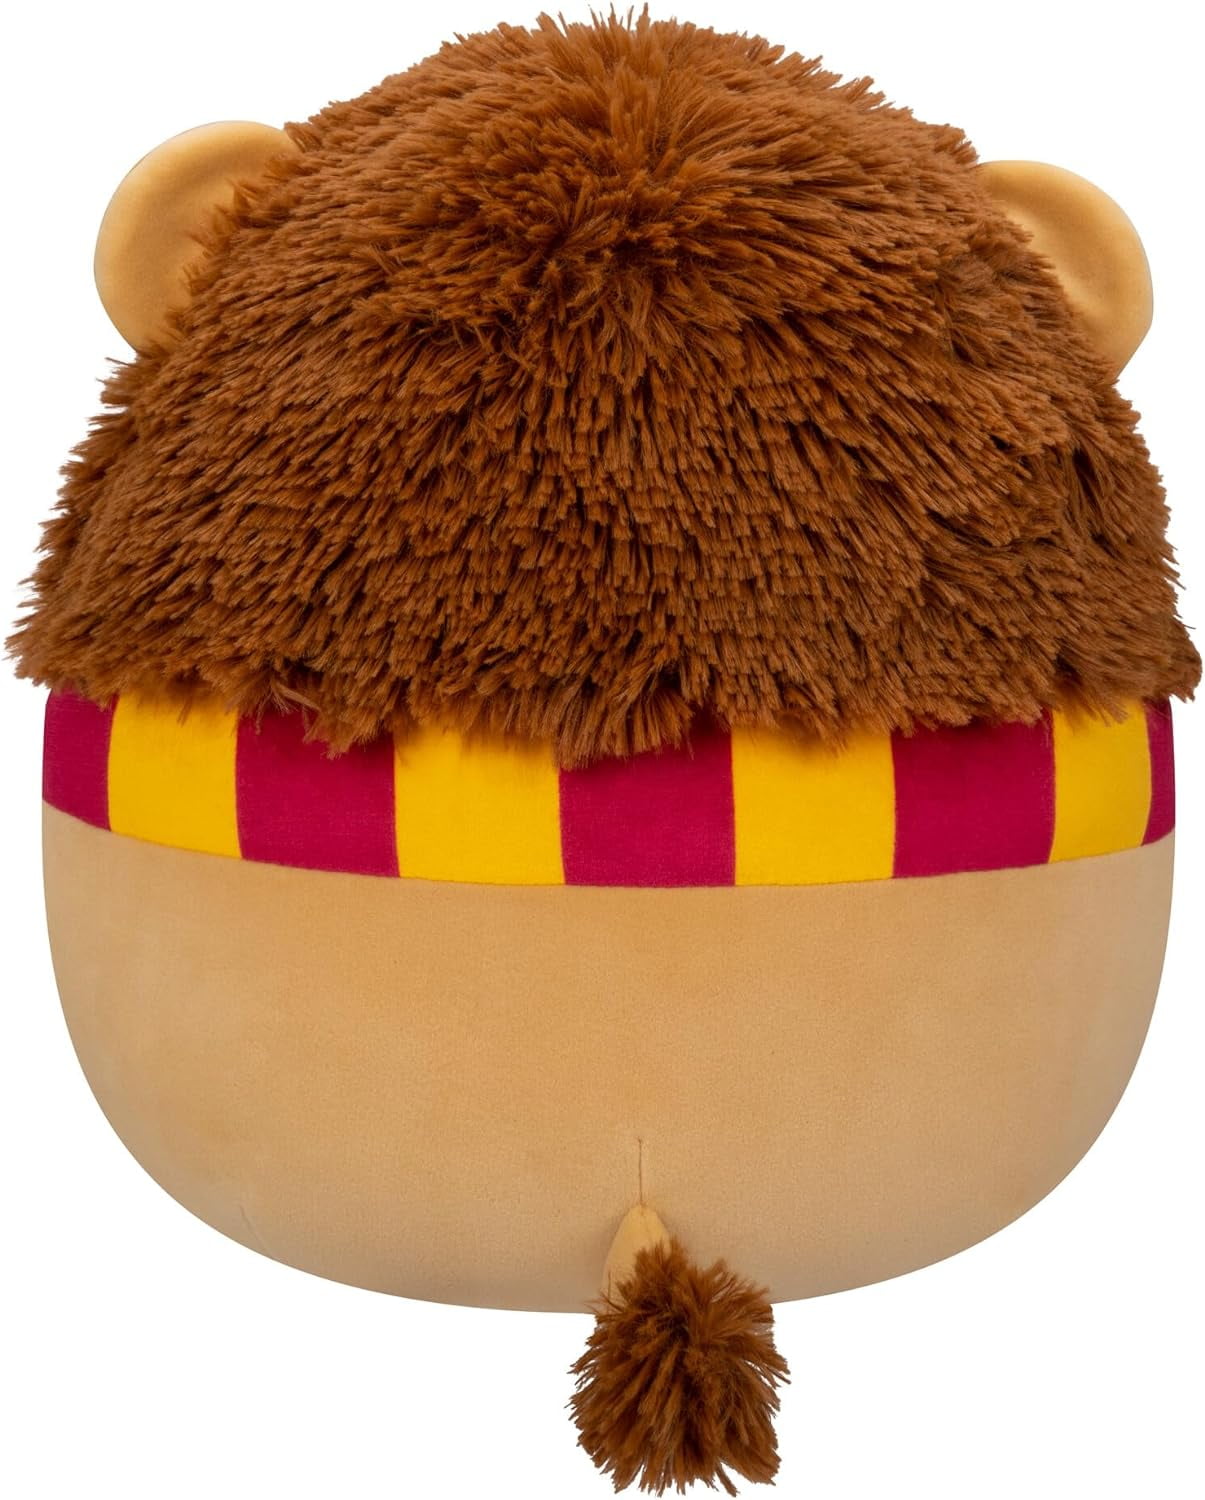 Walmart Barboursville - We have Harry Potter squishmallows